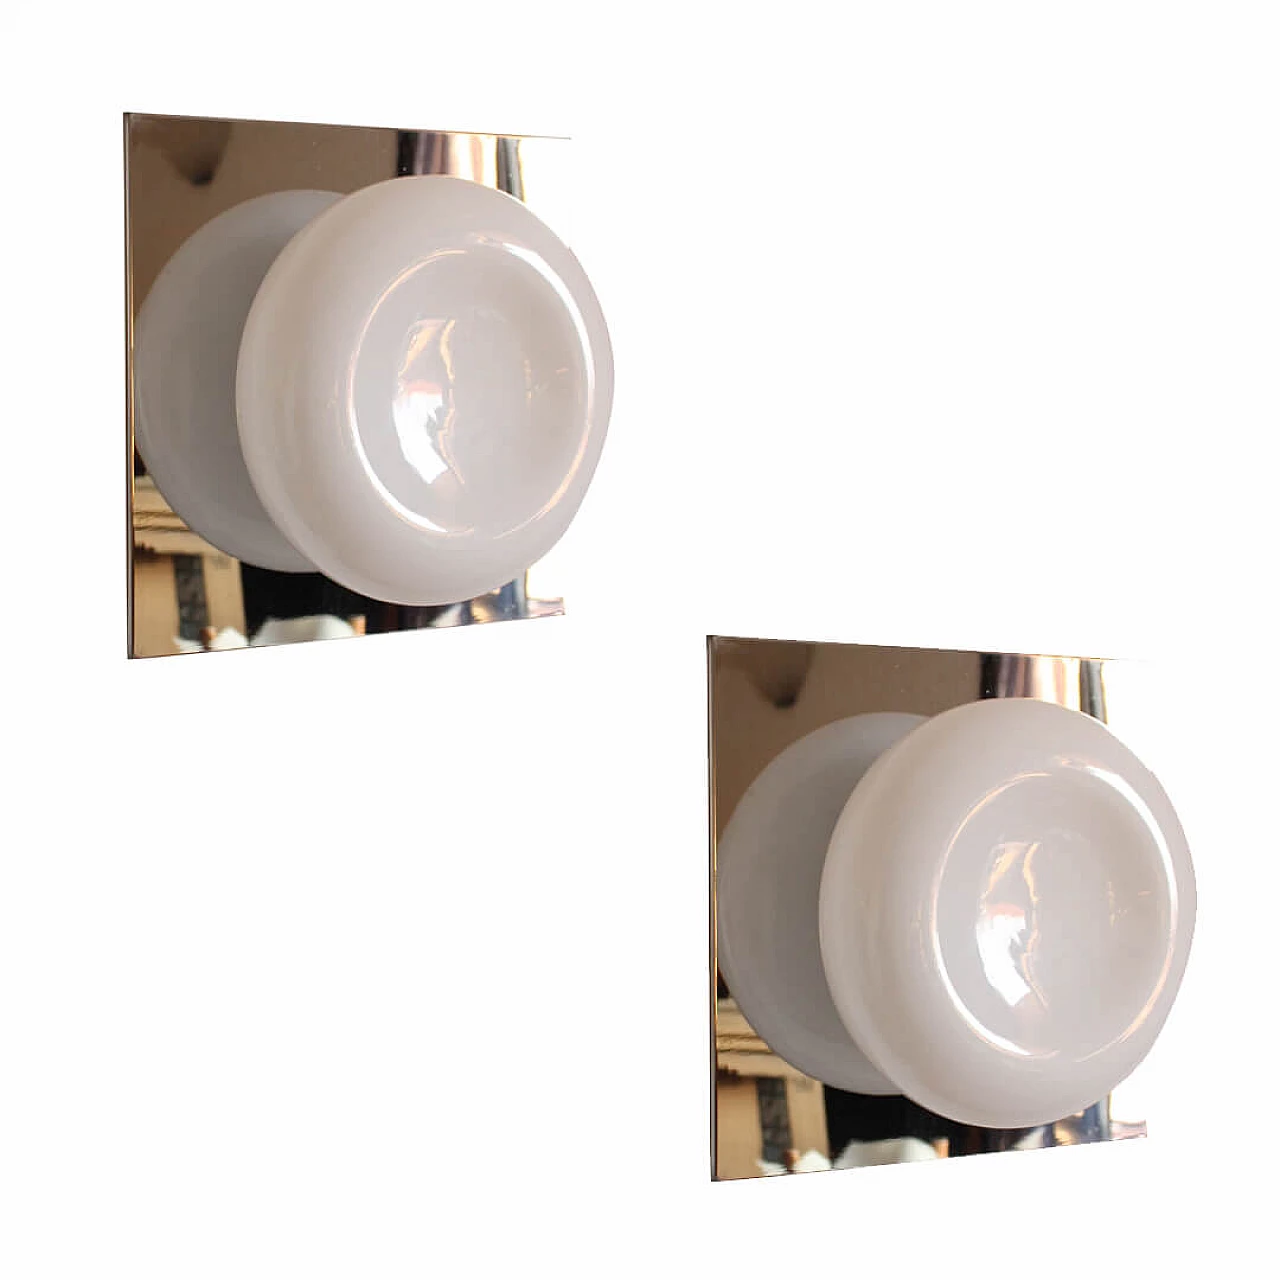 Pair of Pia 1 wall sconce by Gregorietti for Sirrah 1103418